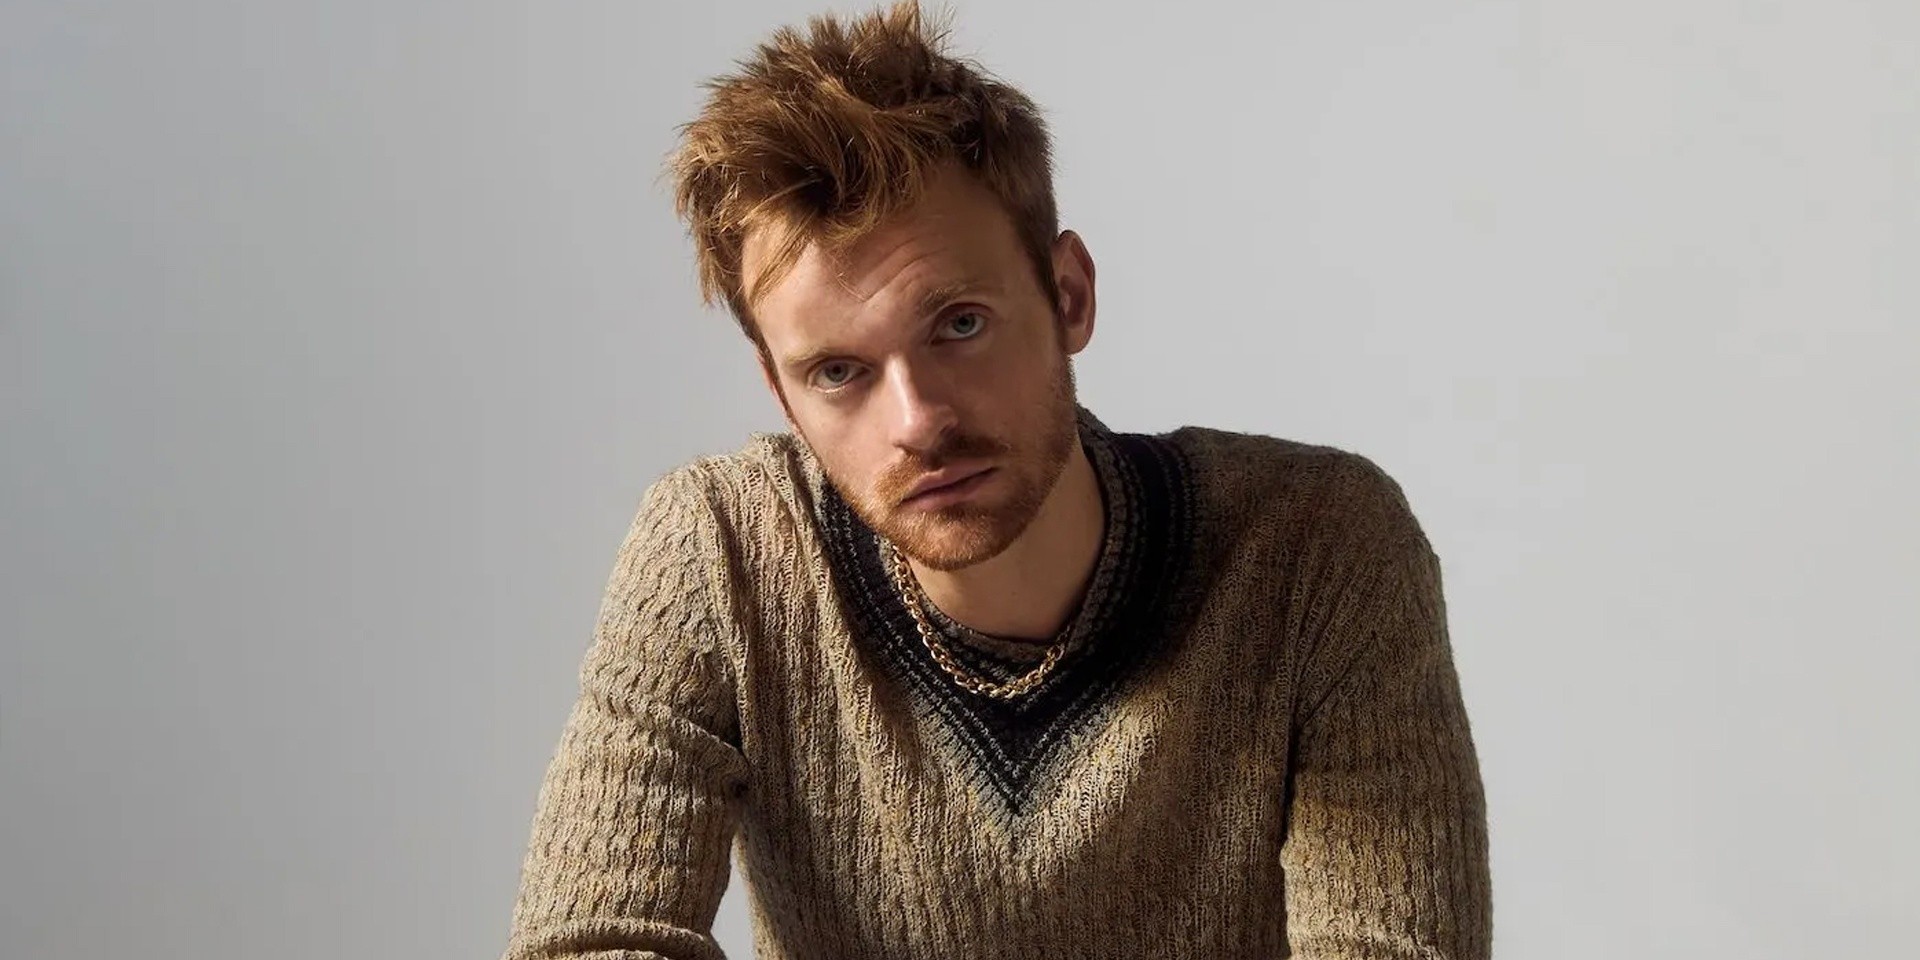 FINNEAS rules the Hollywood Bowl in 'A Concert Six Months From Now' music video from debut album 'Optimist' – watch